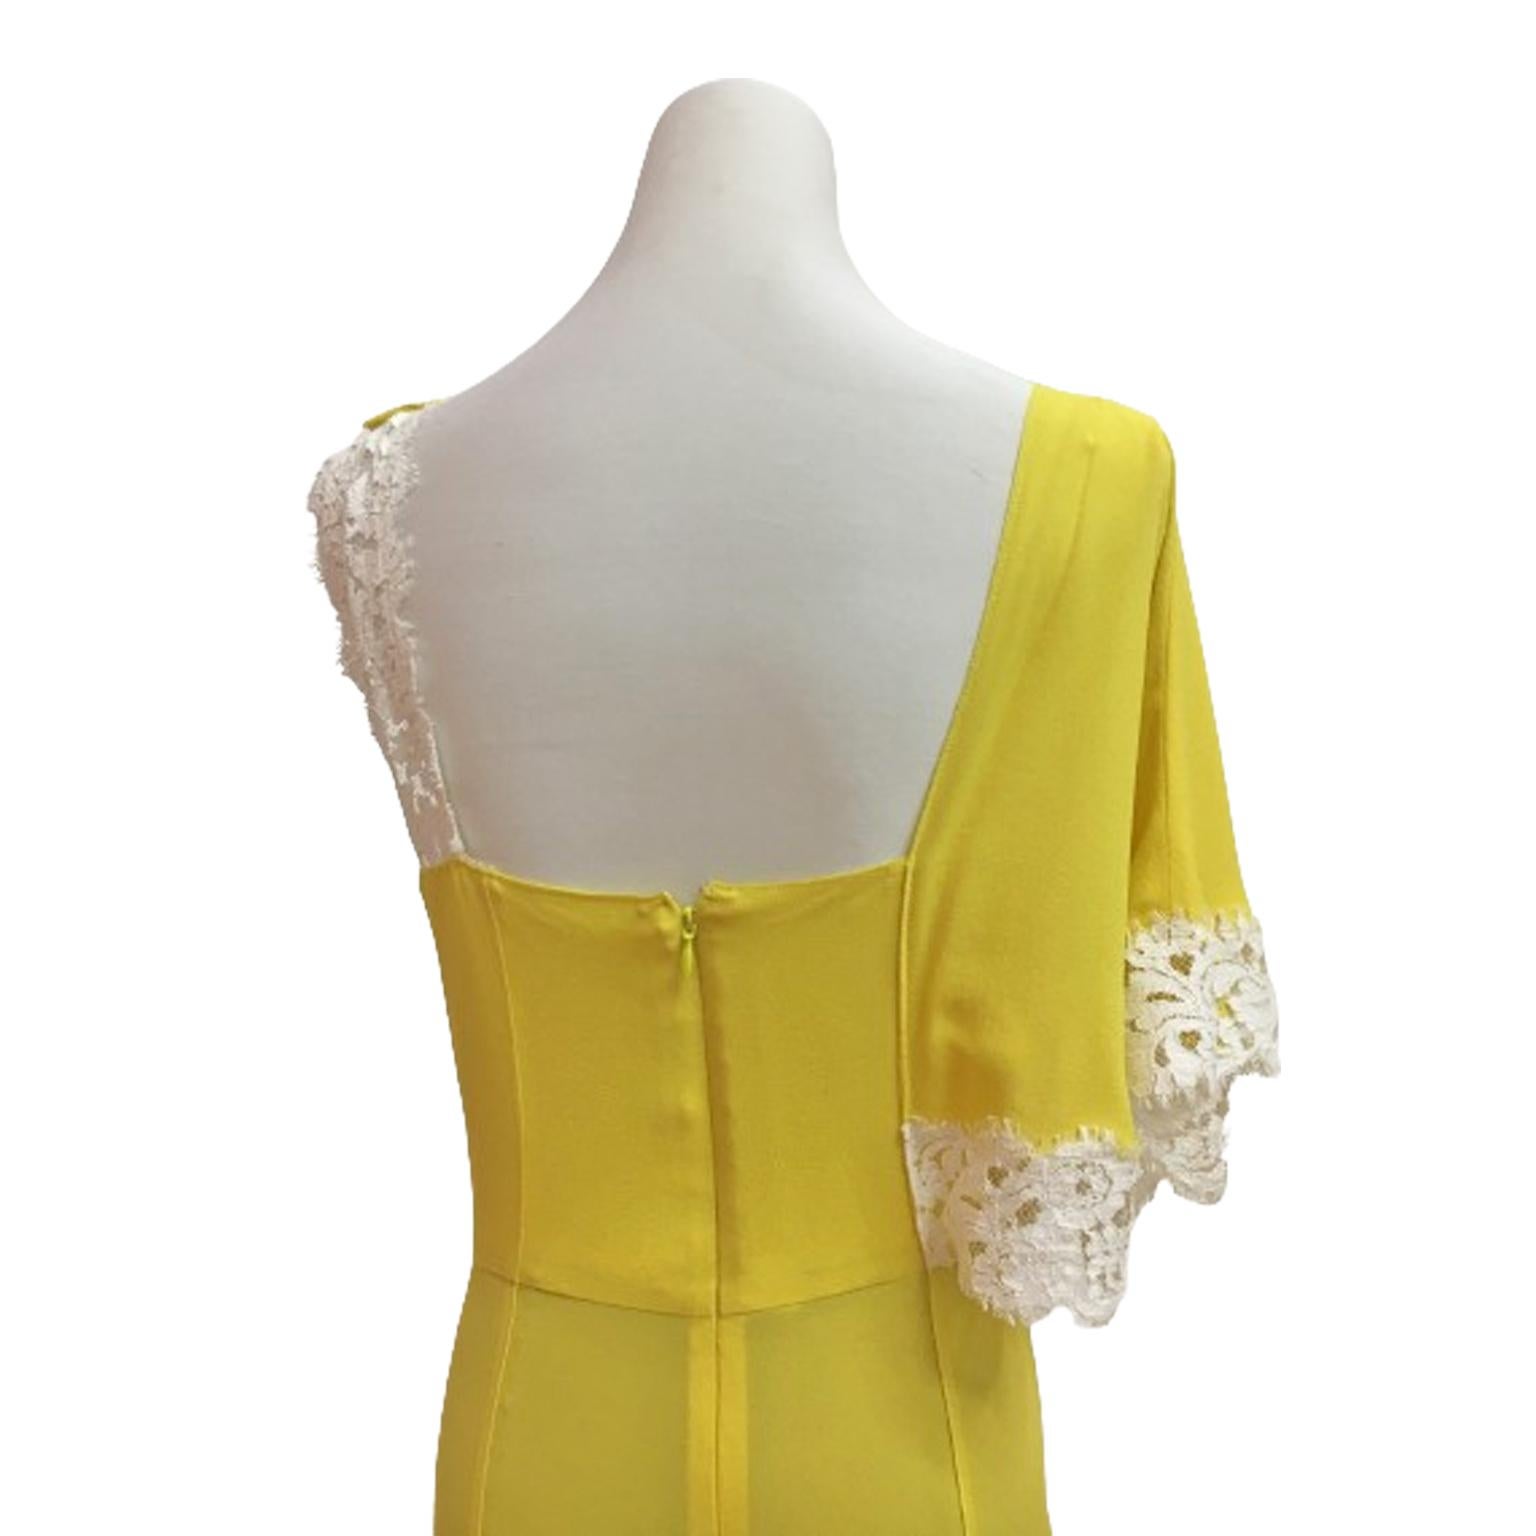 Nina Ricci Olivier Theyskens Sample Dress Gown Yellow Black Lace circa 2010 For Sale 4